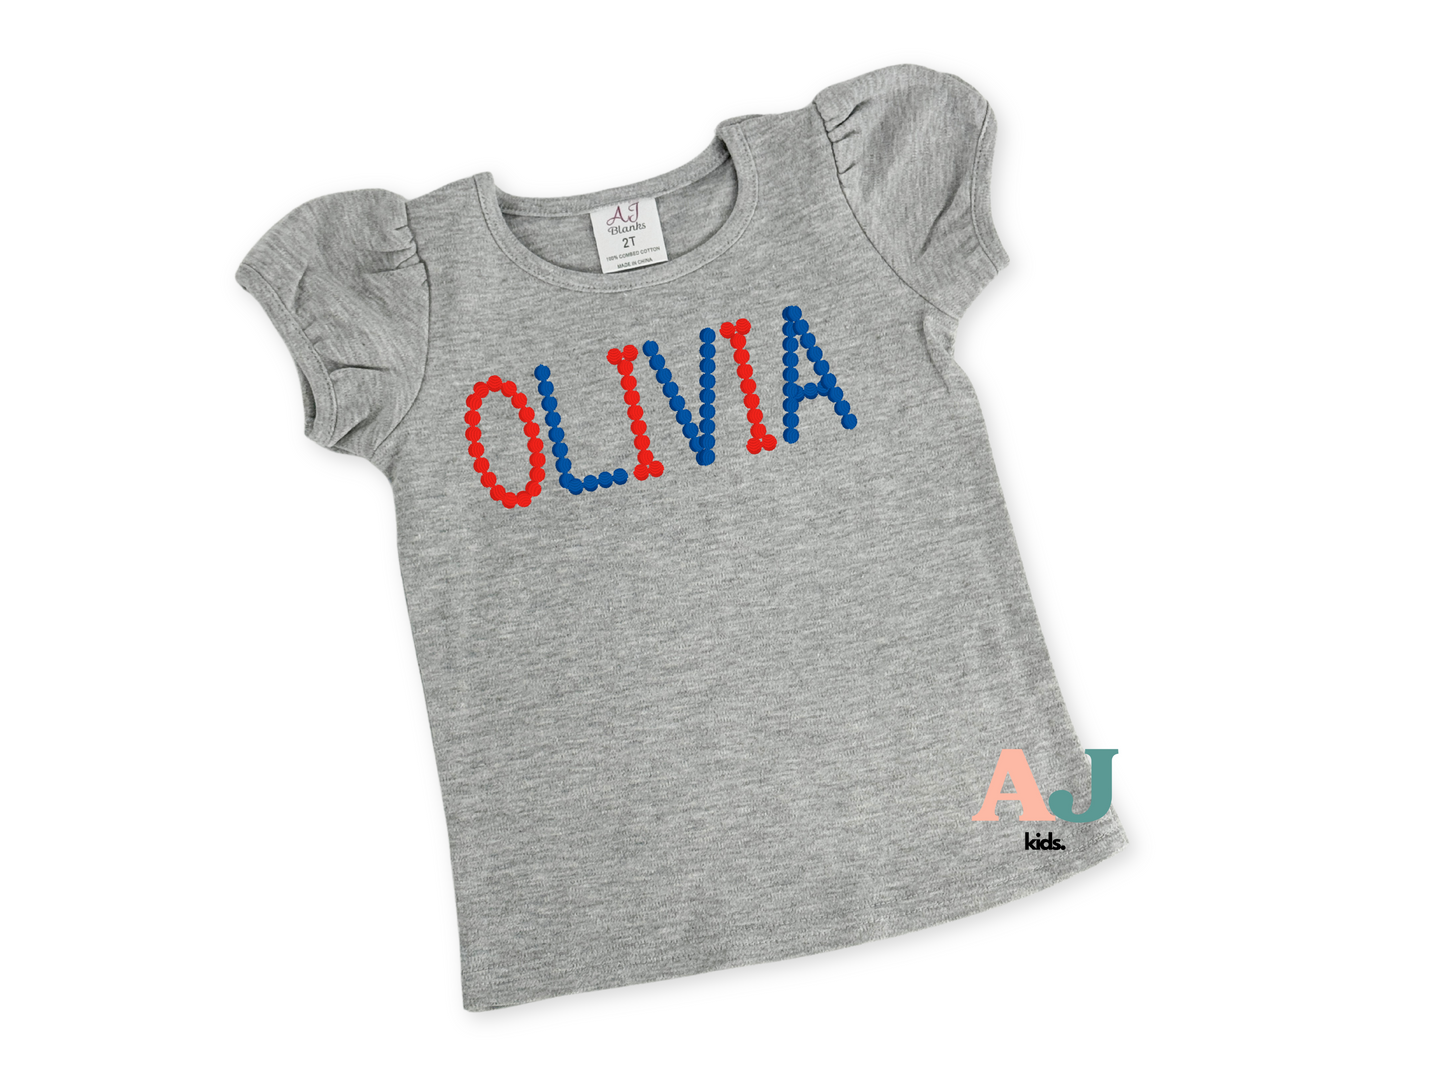 Girls Personalized Embroidered Bead Patriotic Shirt